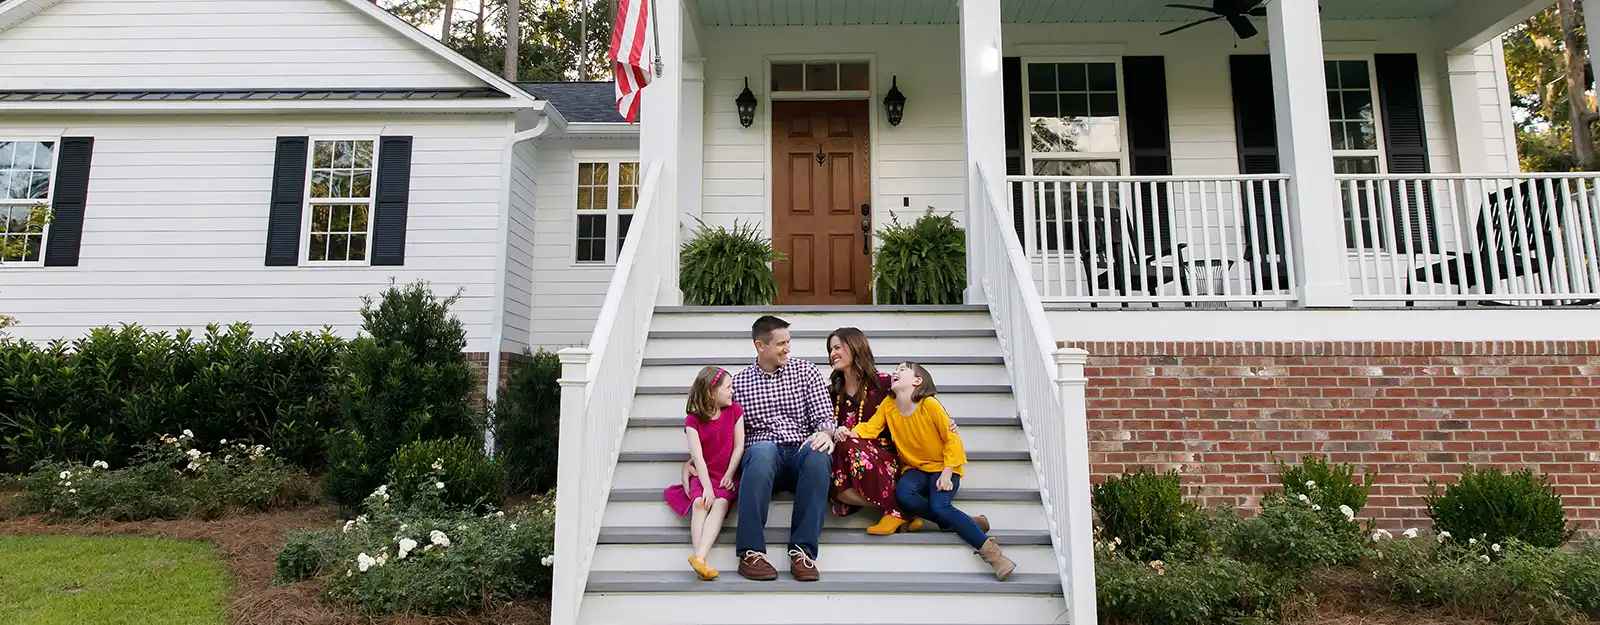 Family sits together on steps of home.